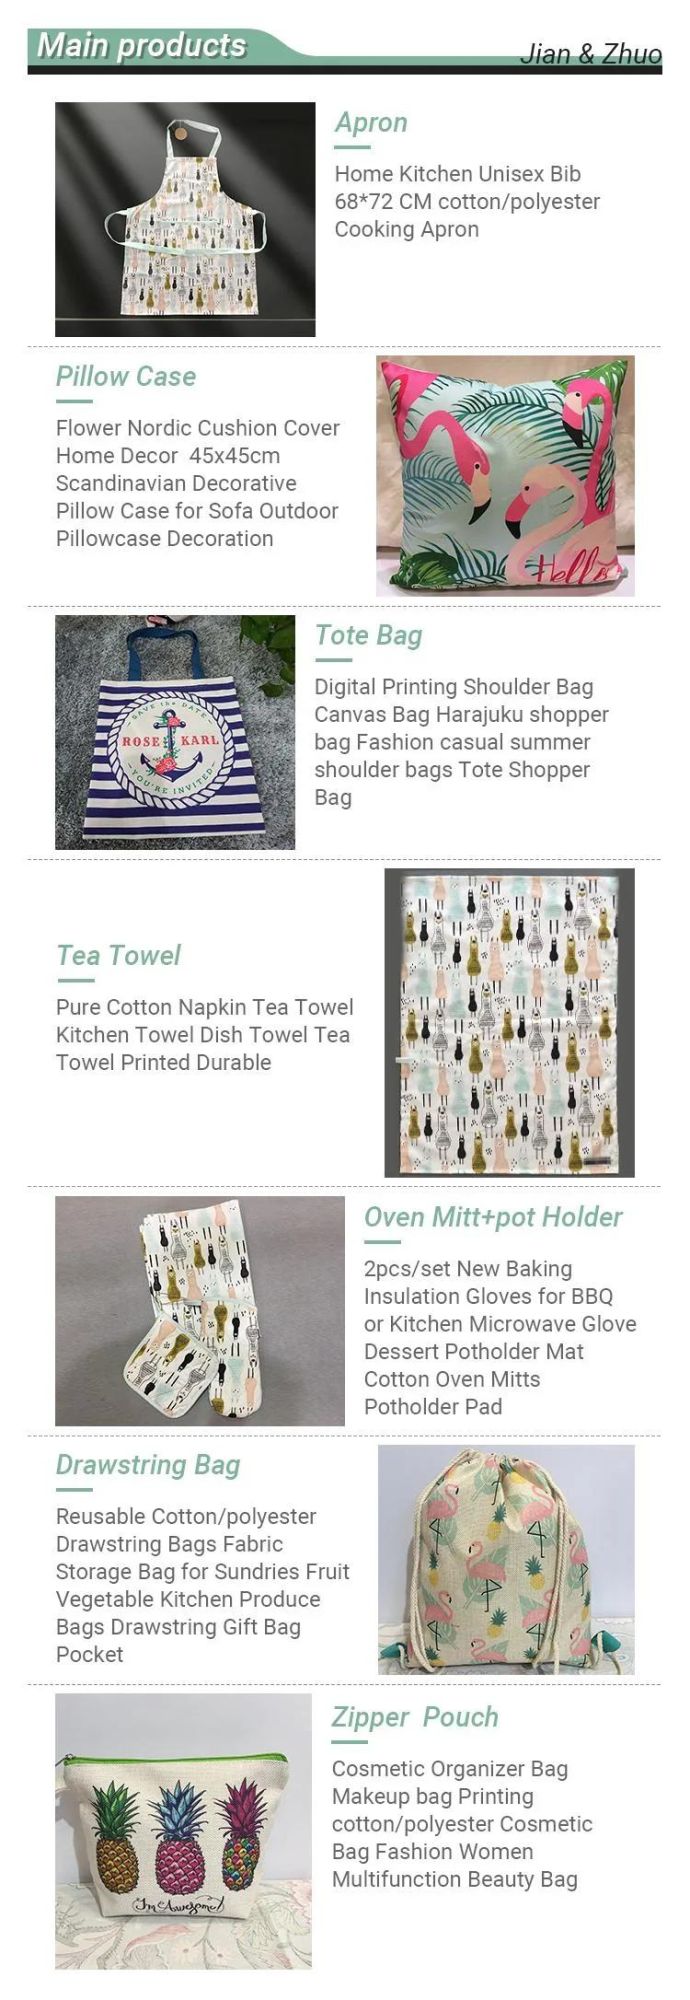 Custom Digital Printed Christmas Alpaca Cotton or Polyester Household Textiles Kitchen Textile Set Cushions Aprons Towels Bags and Oven Mitts